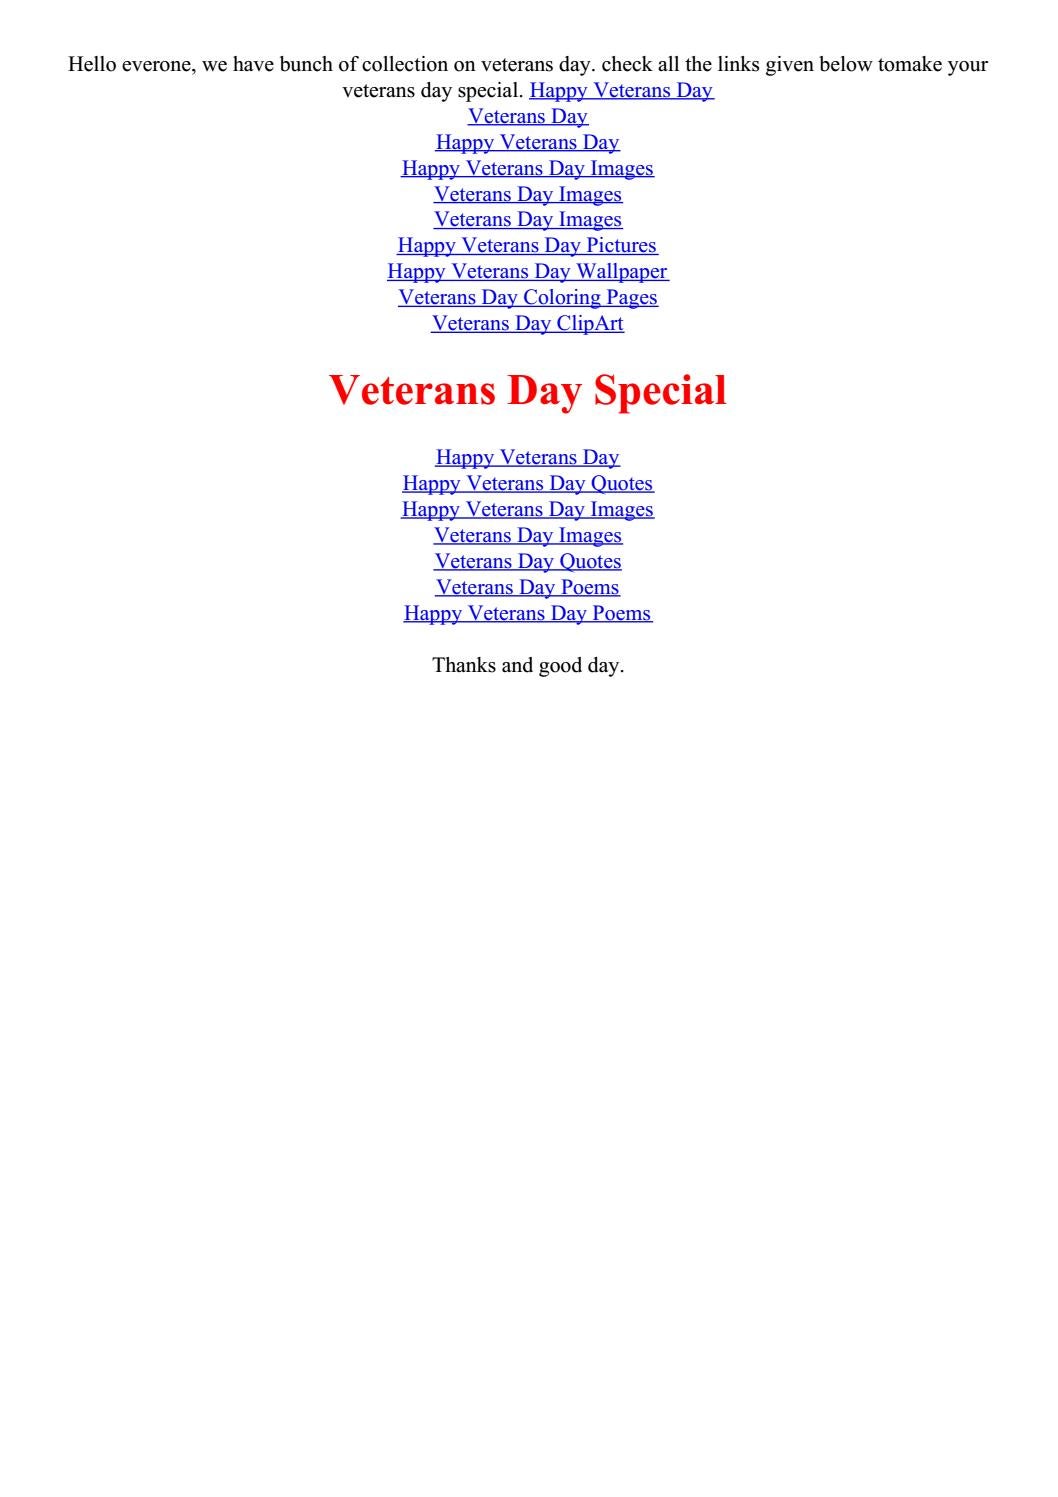 Veterans day special by paras sharma